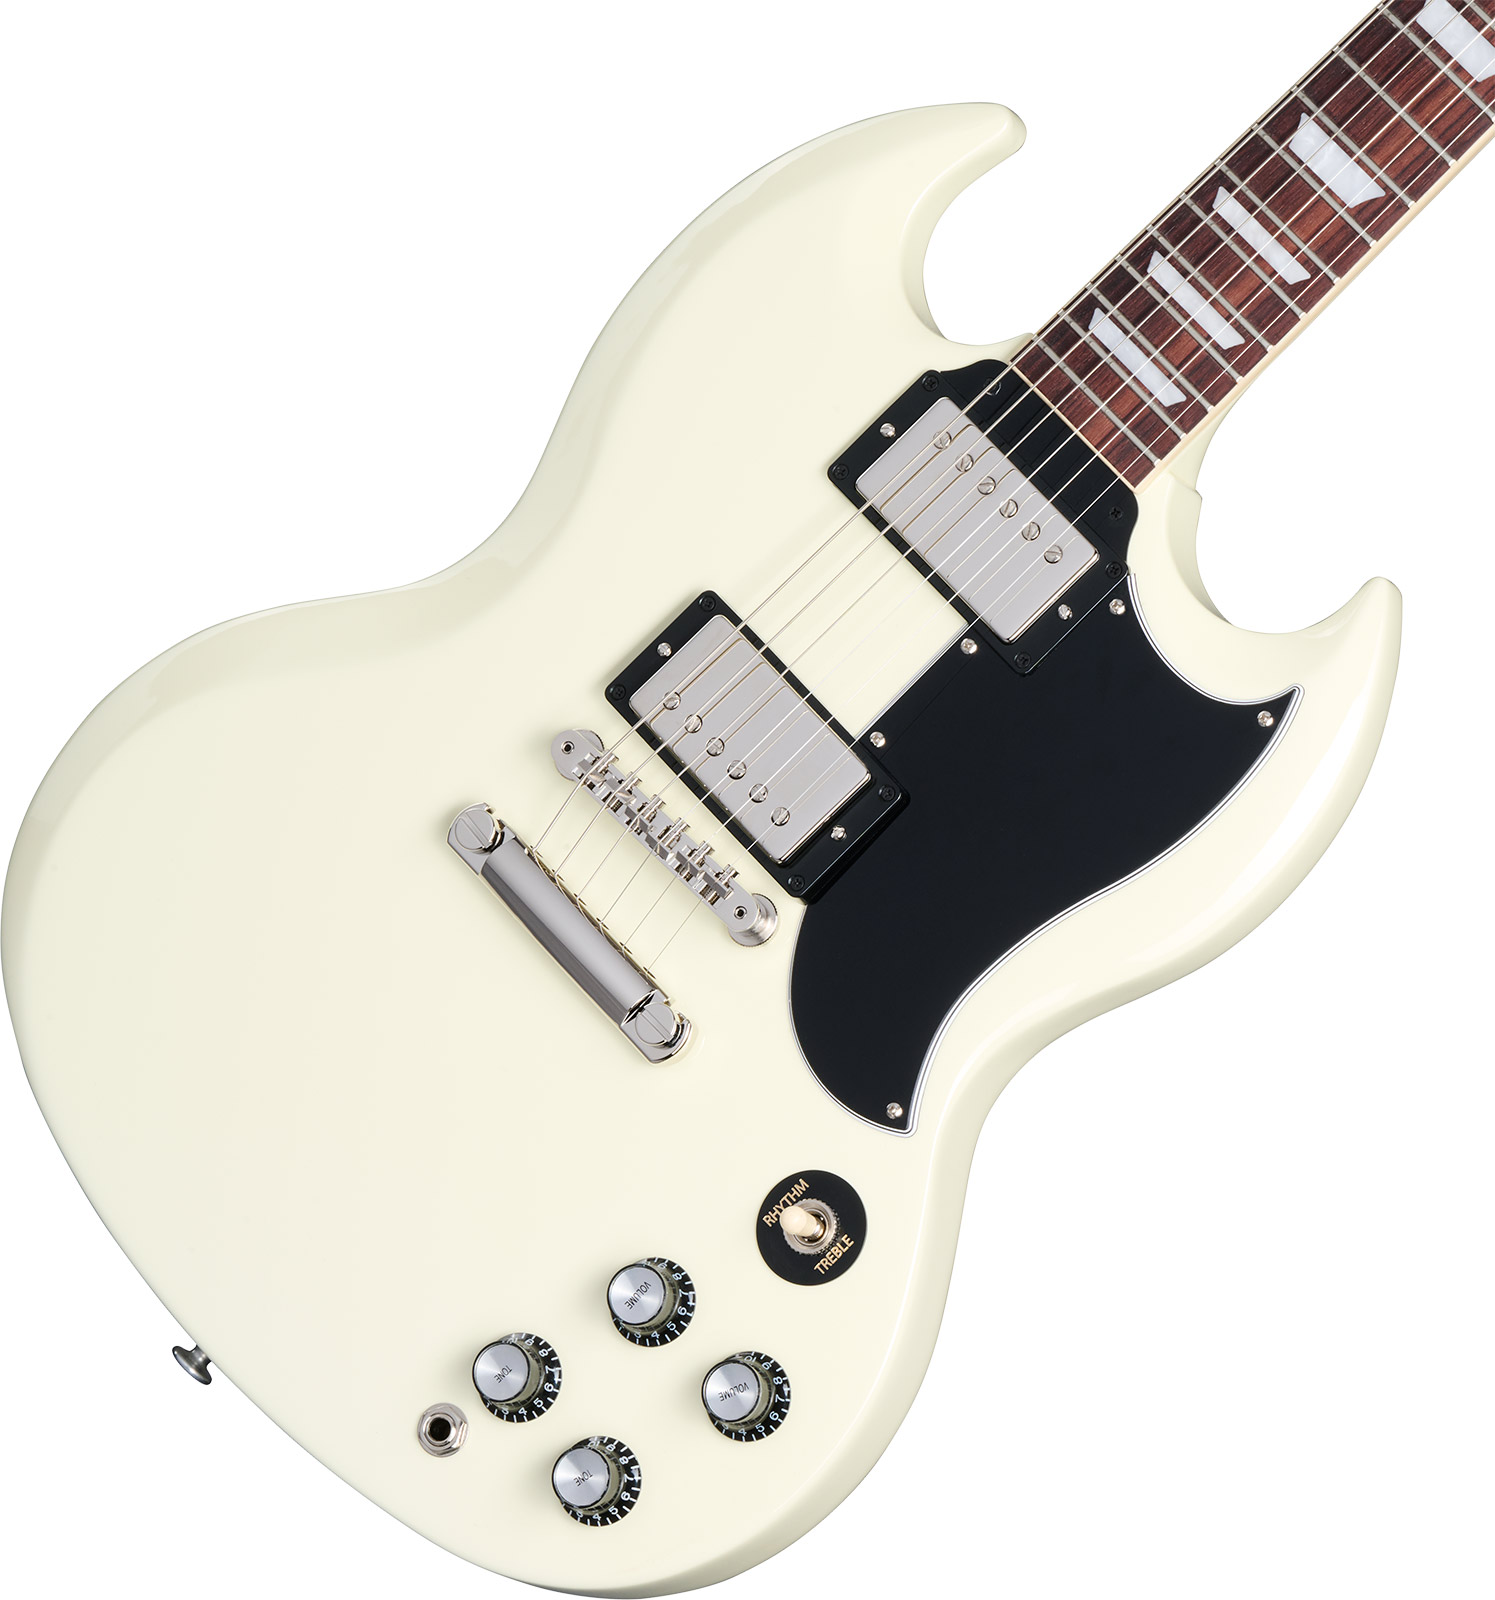 Gibson Sg Standard 1961 Custom Color 2h Ht Rw - Classic White - Double cut electric guitar - Variation 3